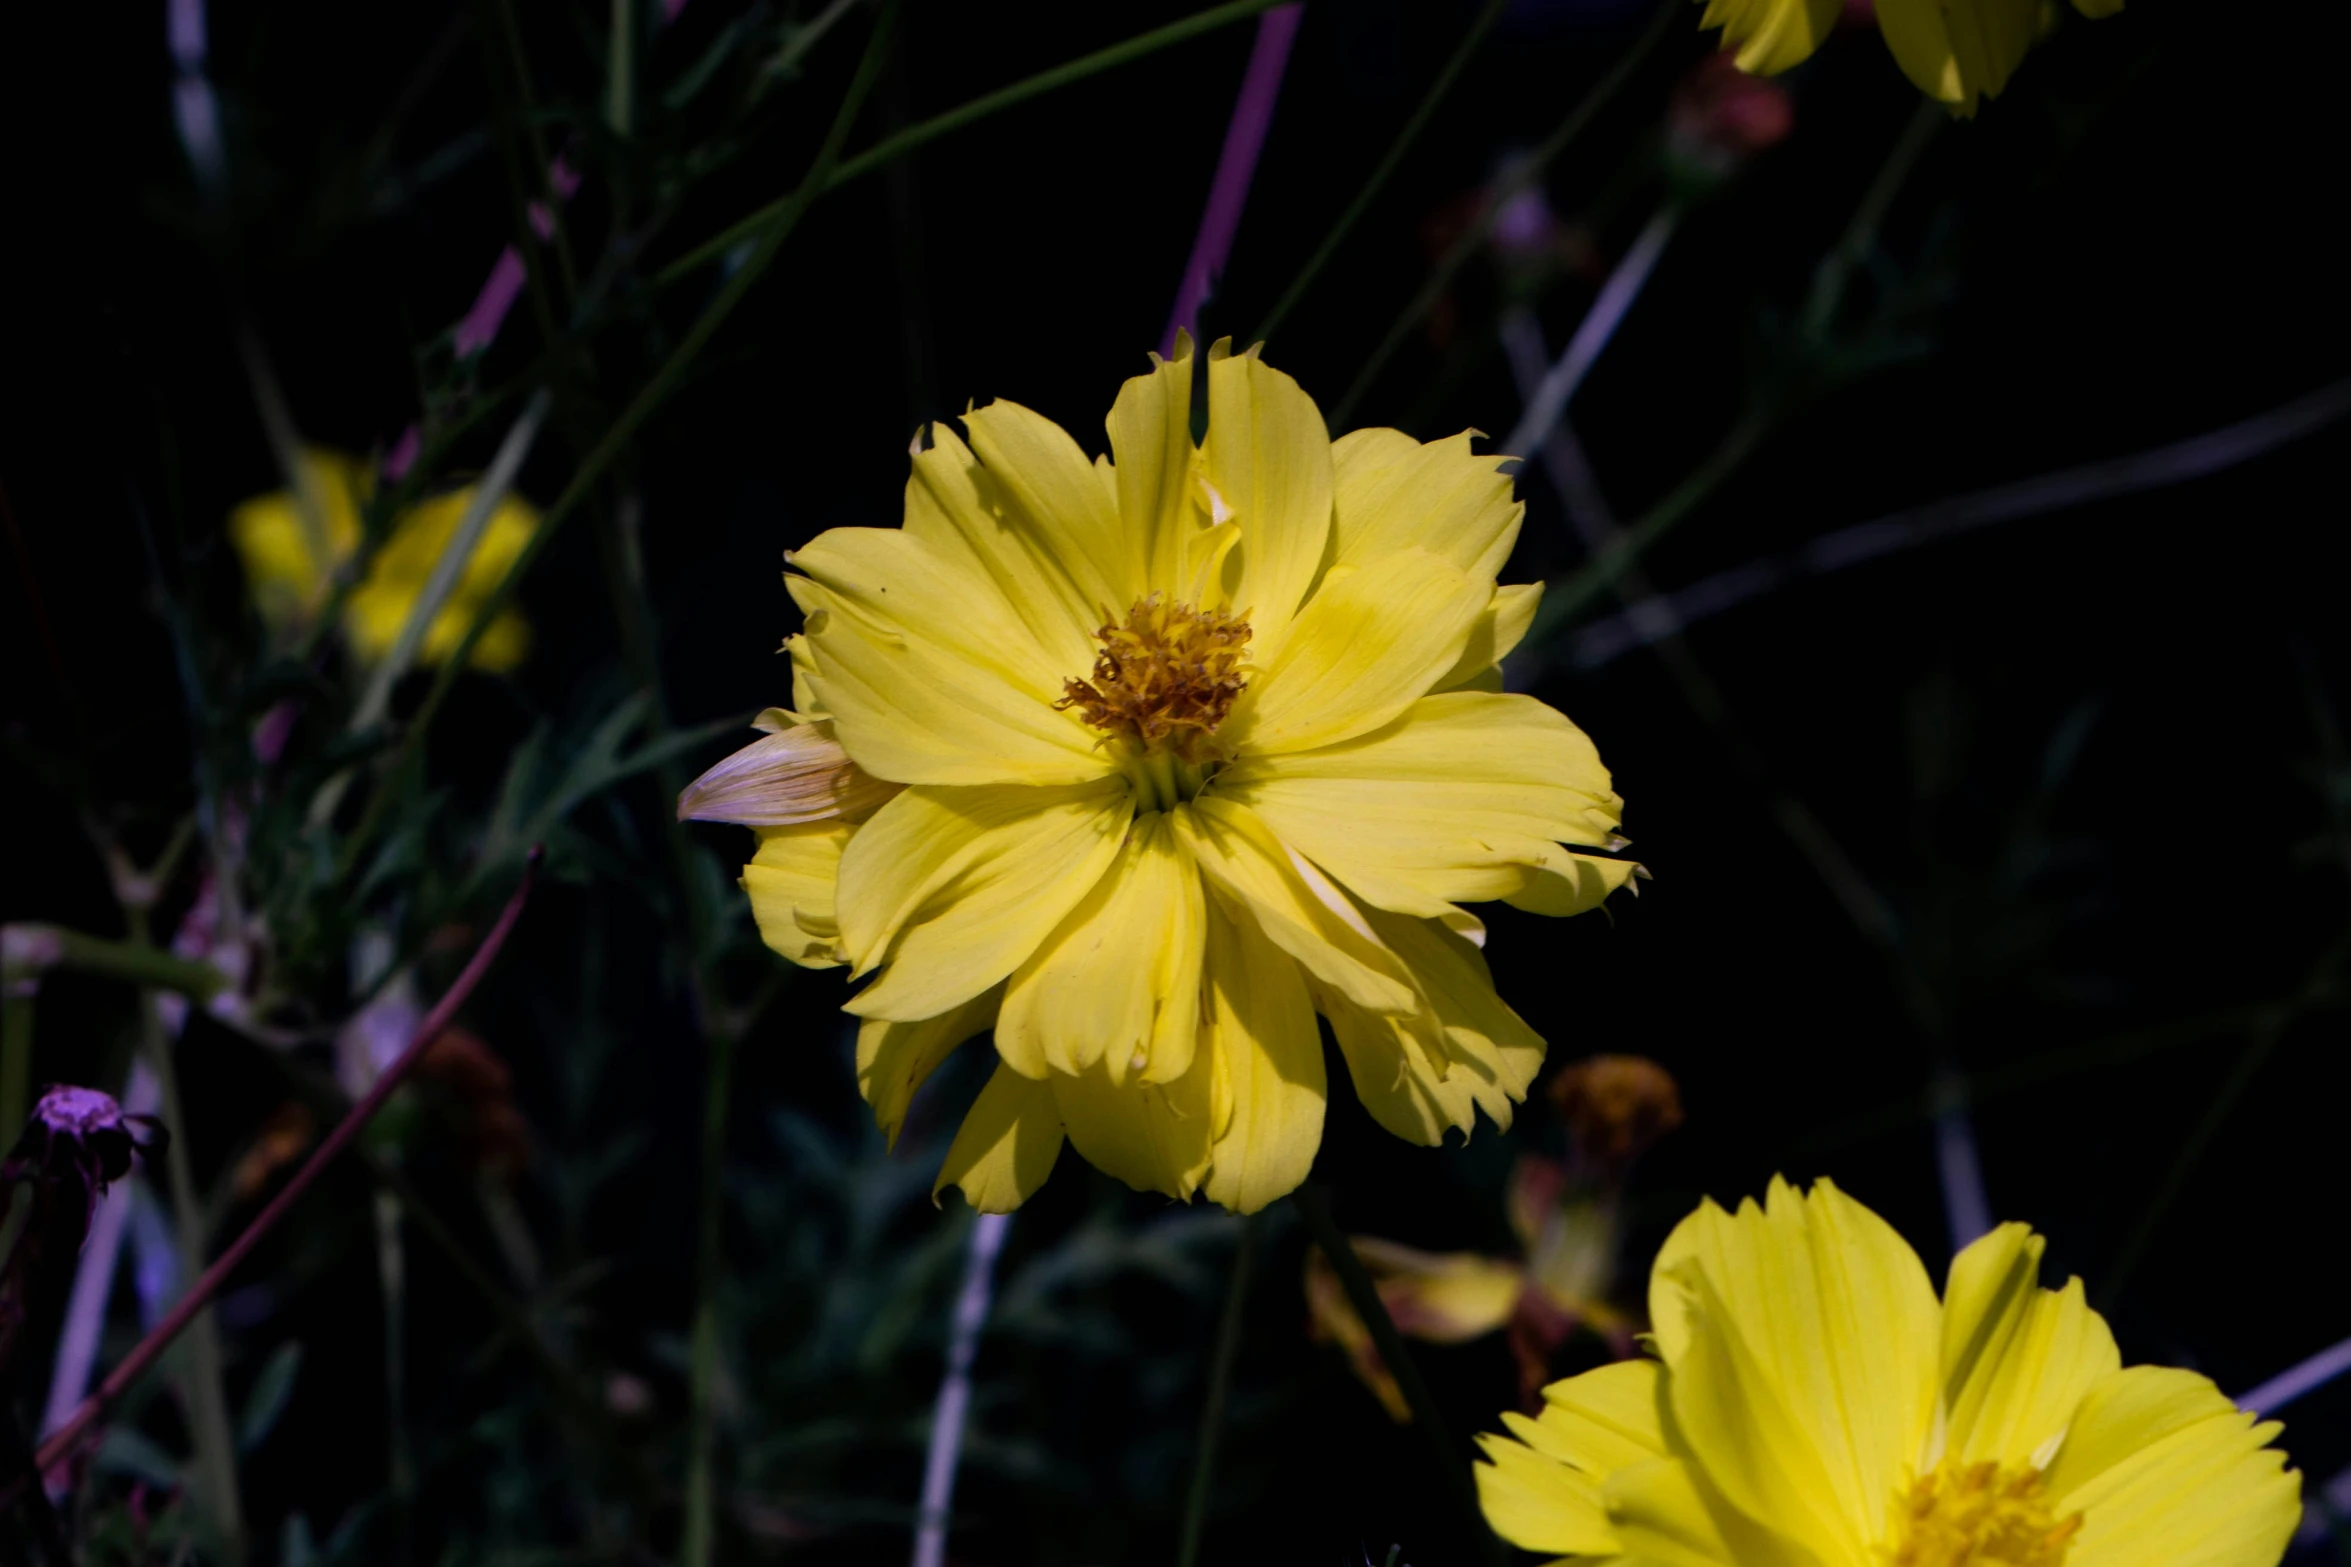 some yellow flowers growing together in the night